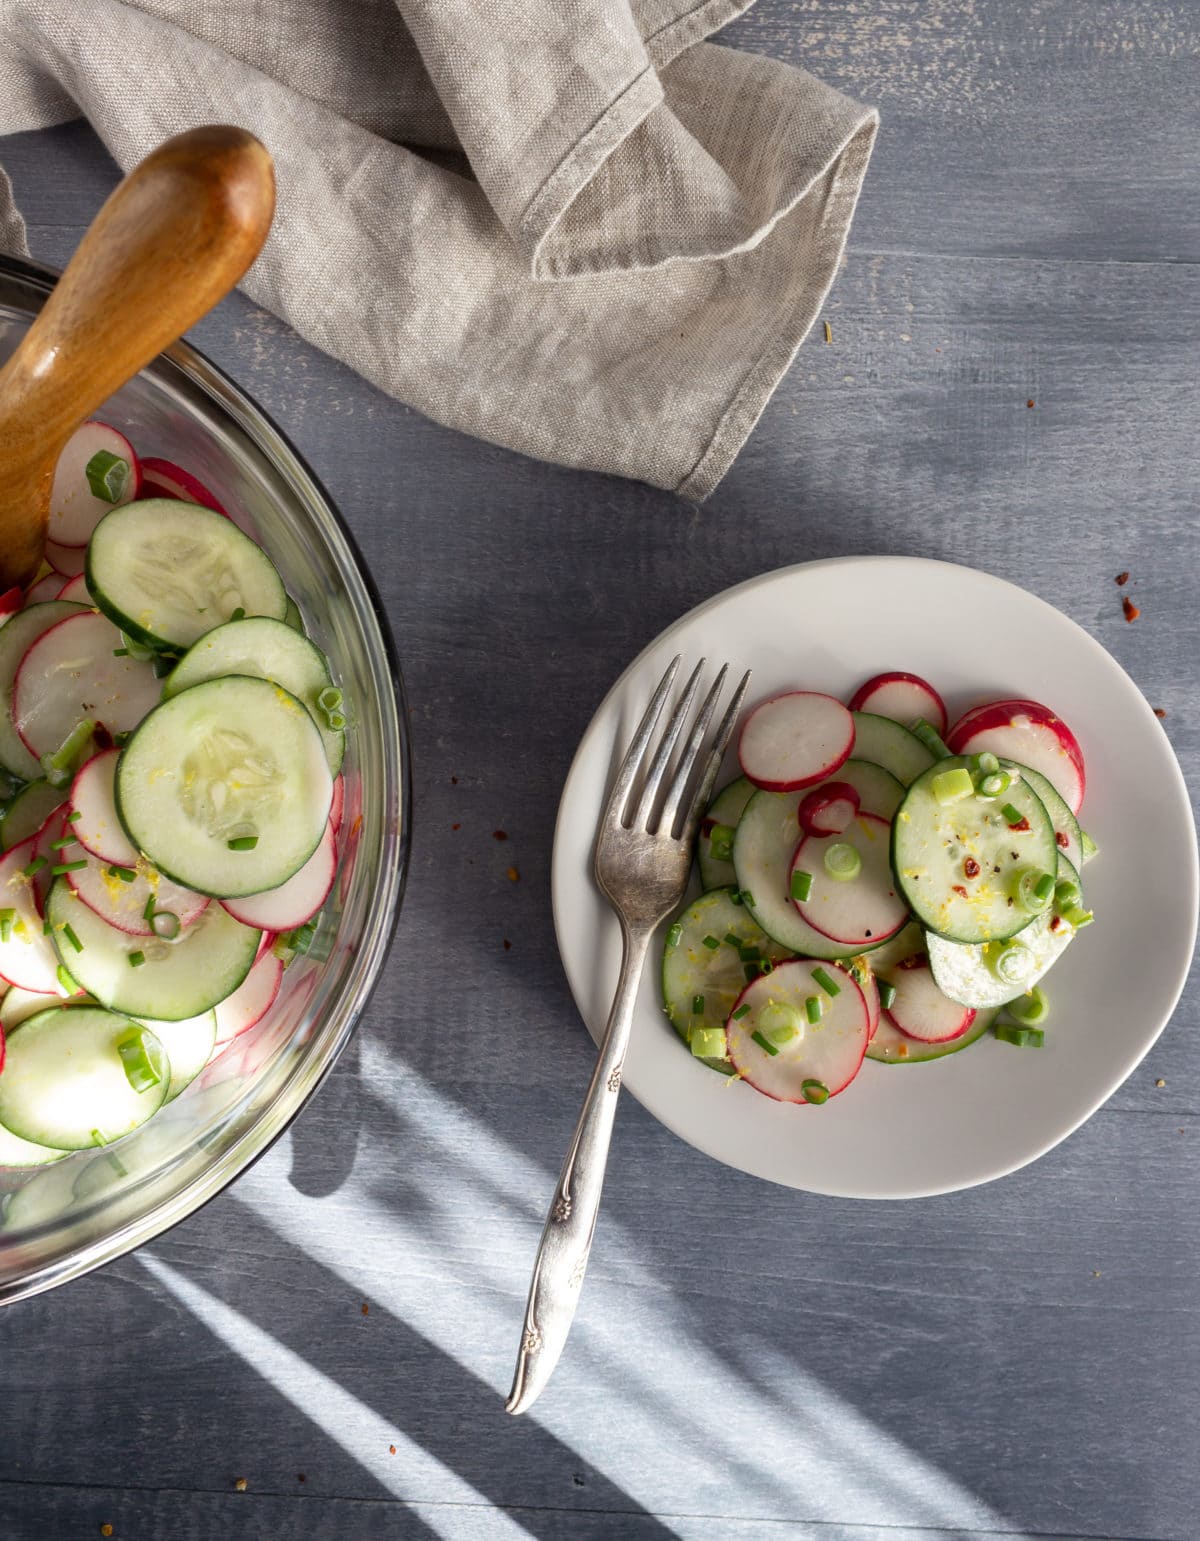 Bowl of cucumber salad with some on a plate